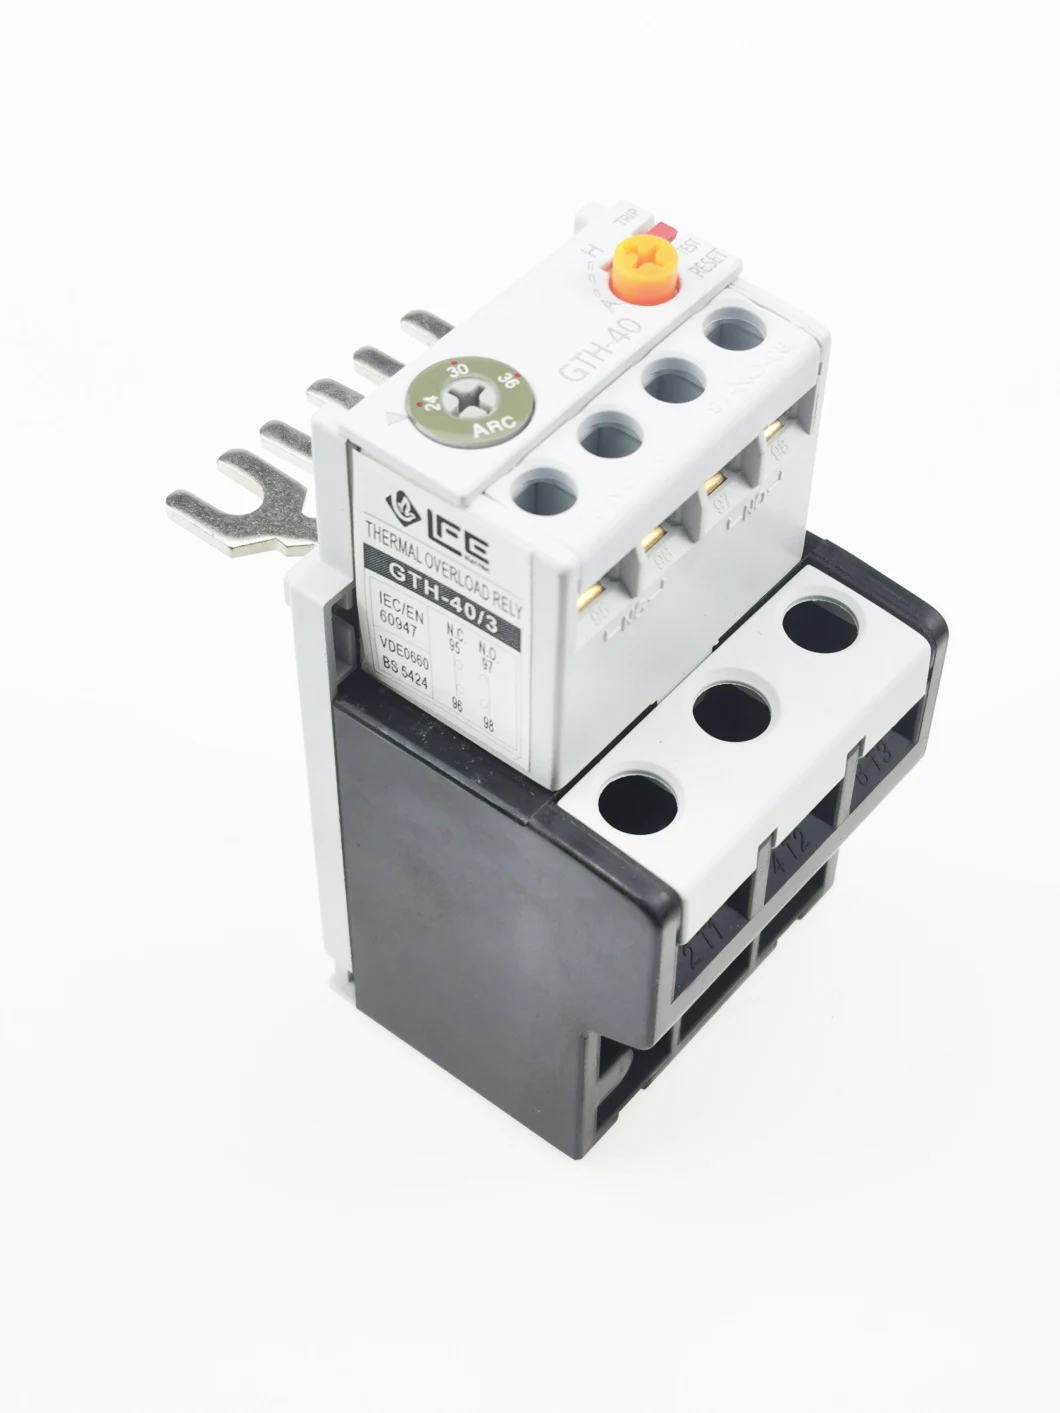 Gth-40 Thermal Overload Relay, ISO9001 Passed High Quality Thermal Relay, CE Proved Thermal Overload Relay